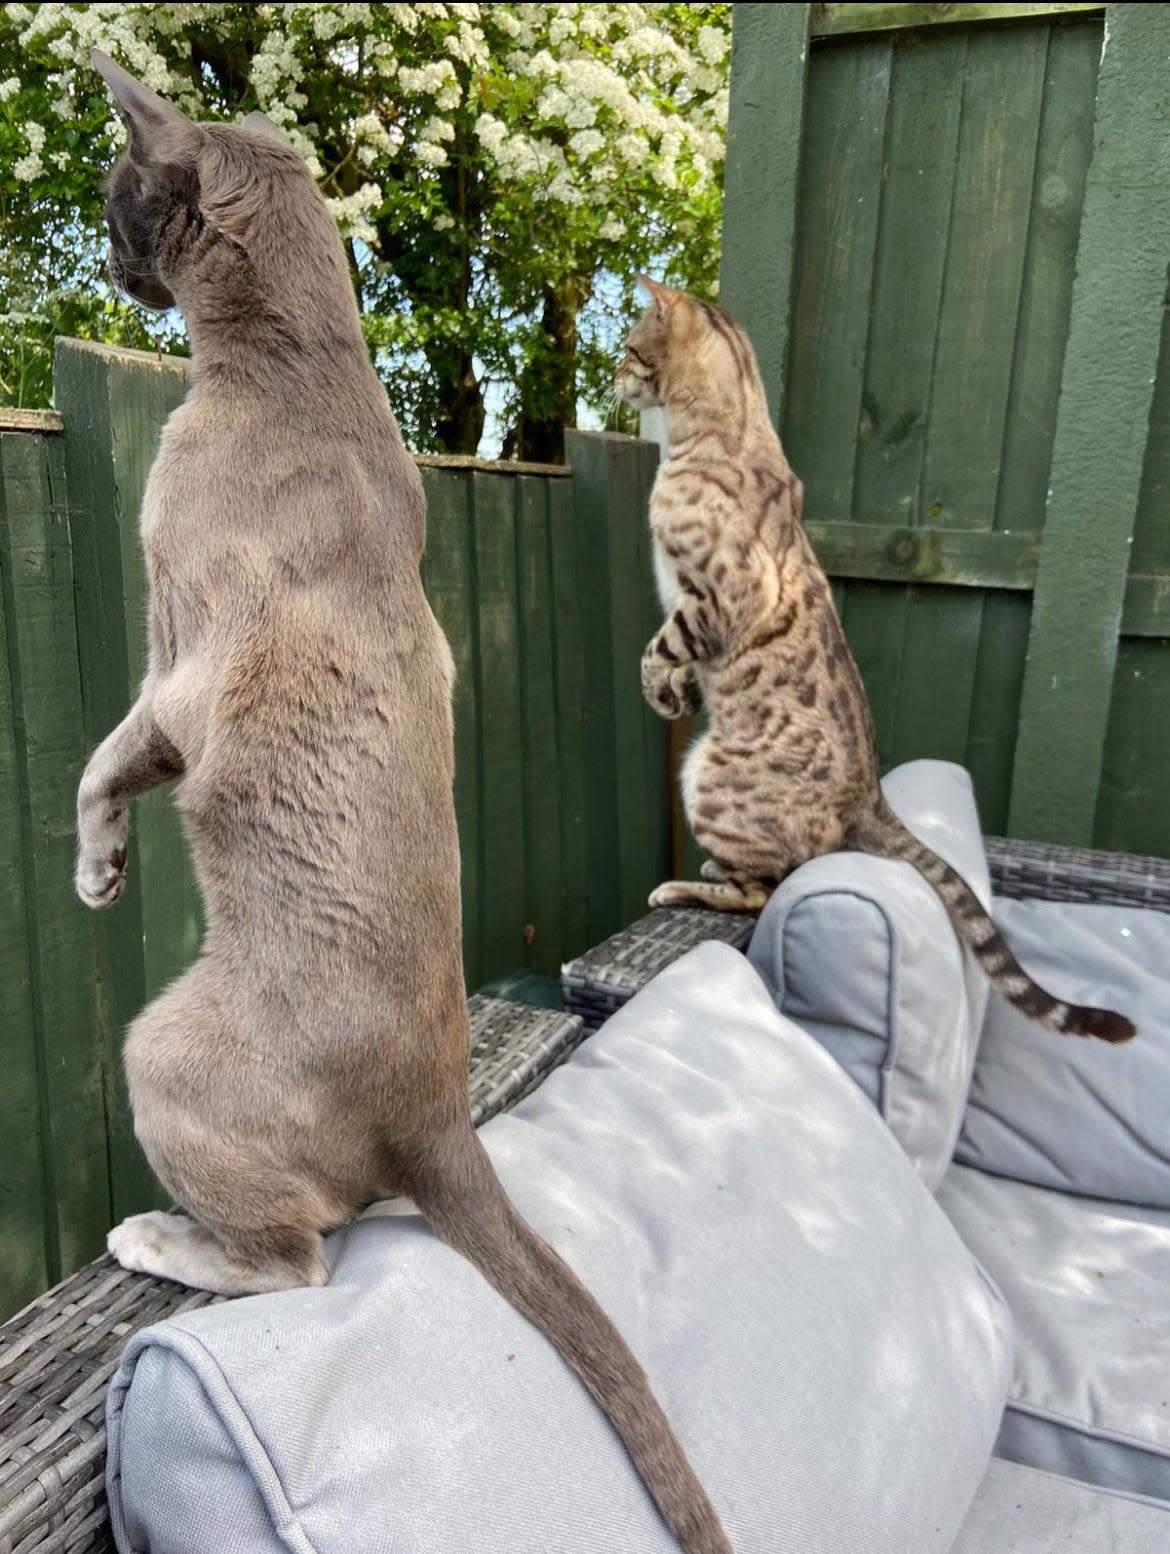 Two cats peer over a fence